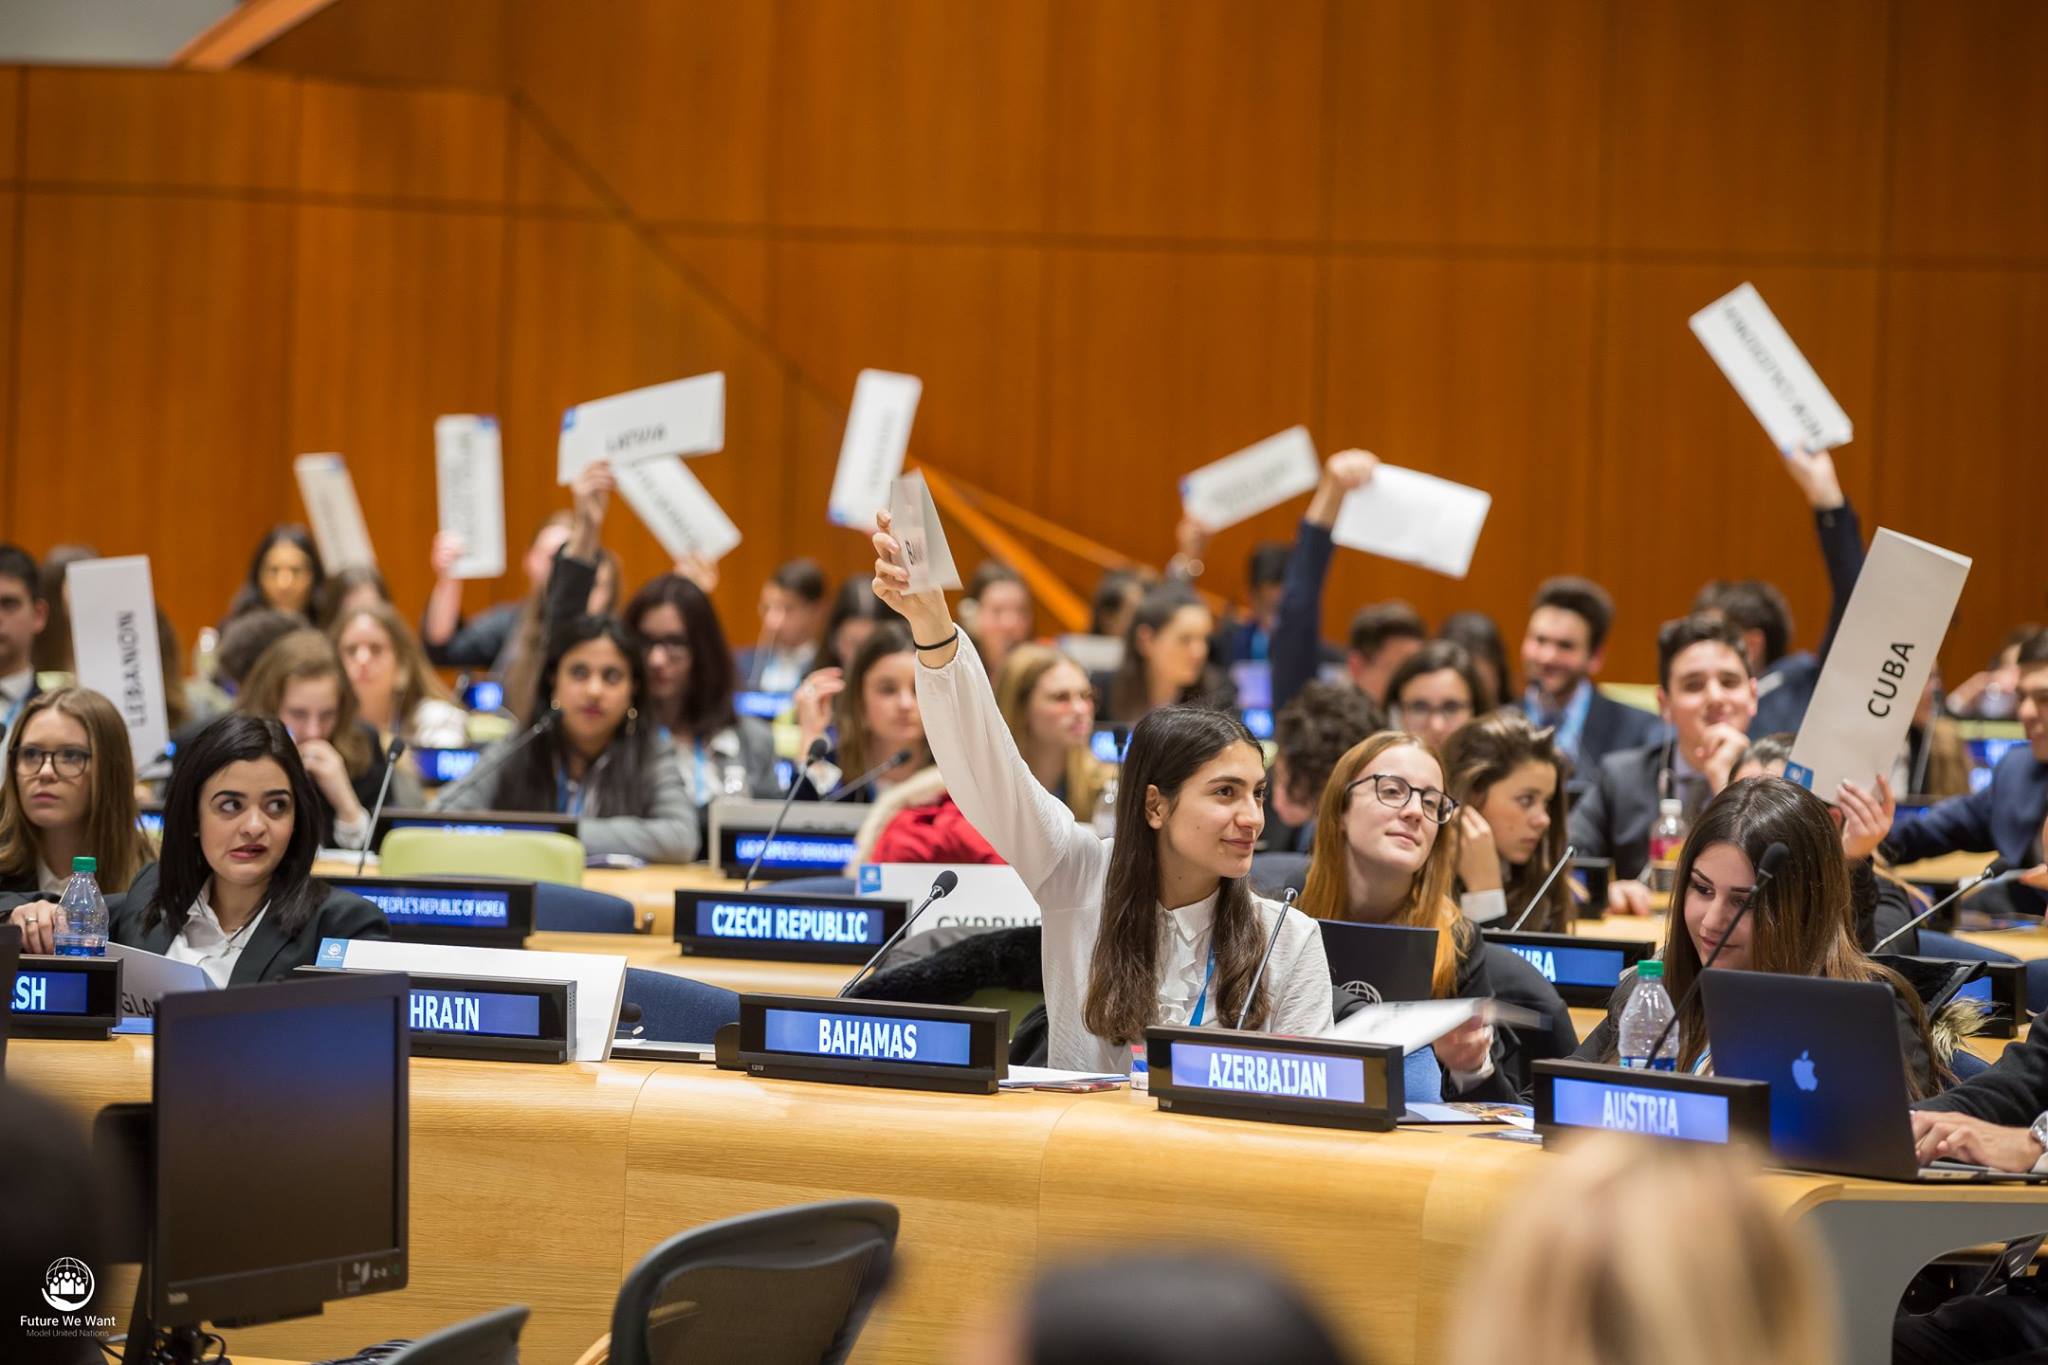 Volunteer at Future We Want Model United Nations 2019